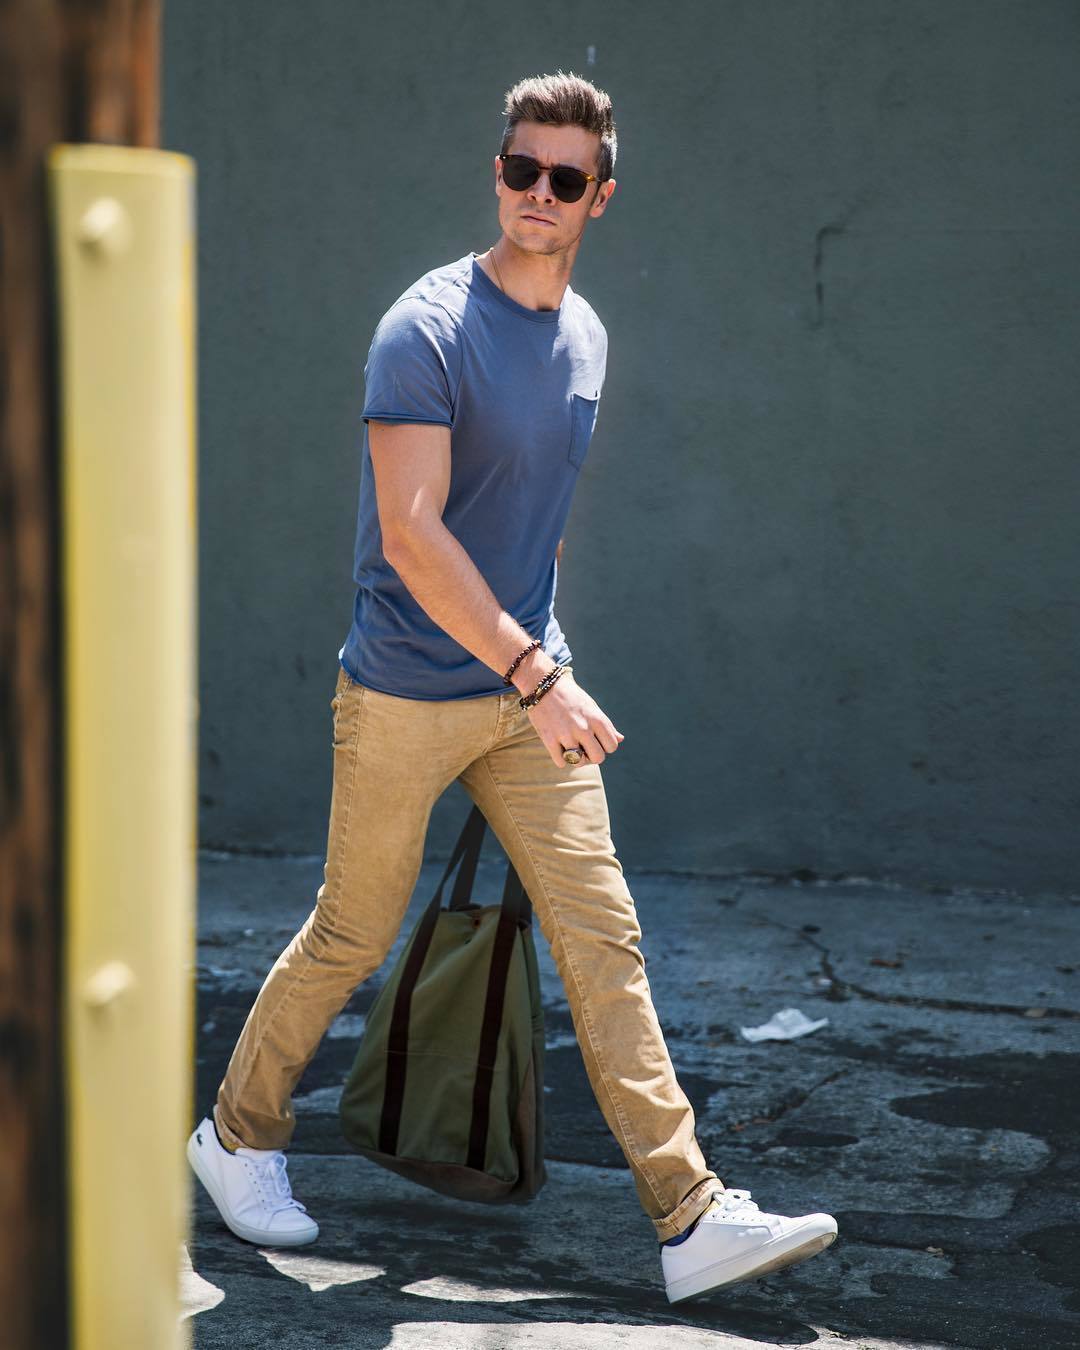 Khaki Chinos with Light Blue Shirt Outfits (438 ideas & outfits) | Lookastic